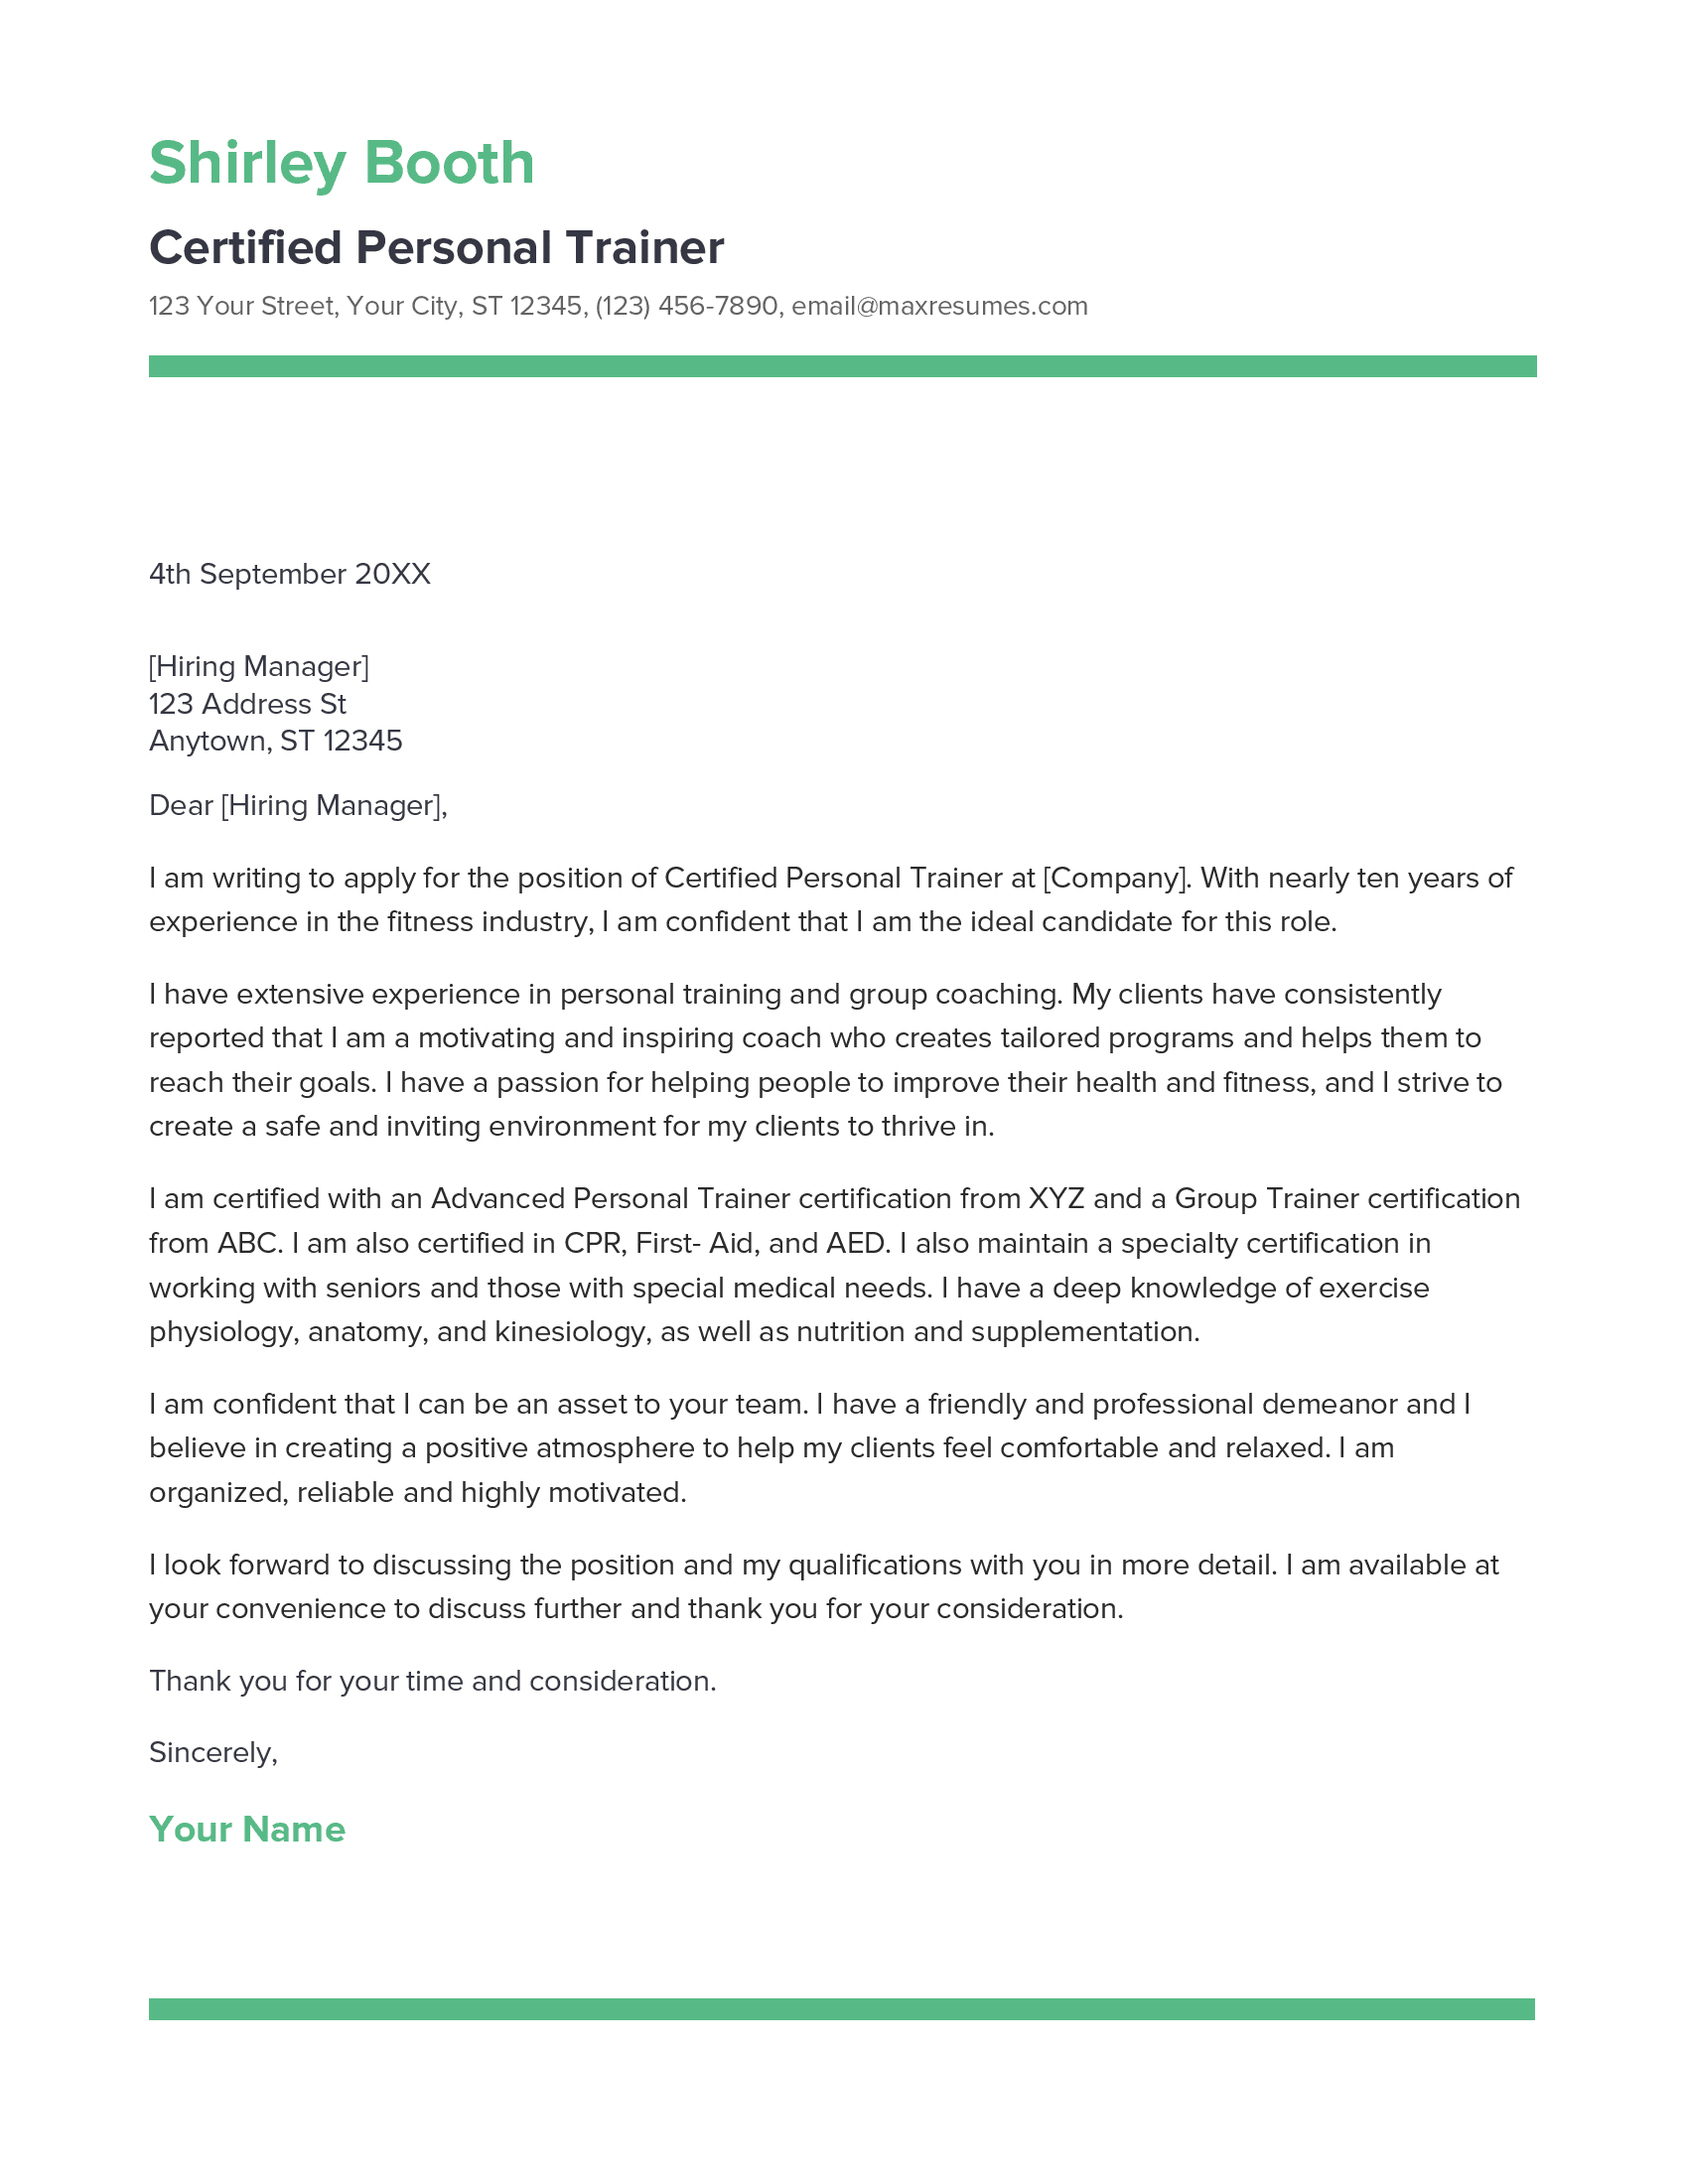 Certified Personal Trainer Cover Letter Example